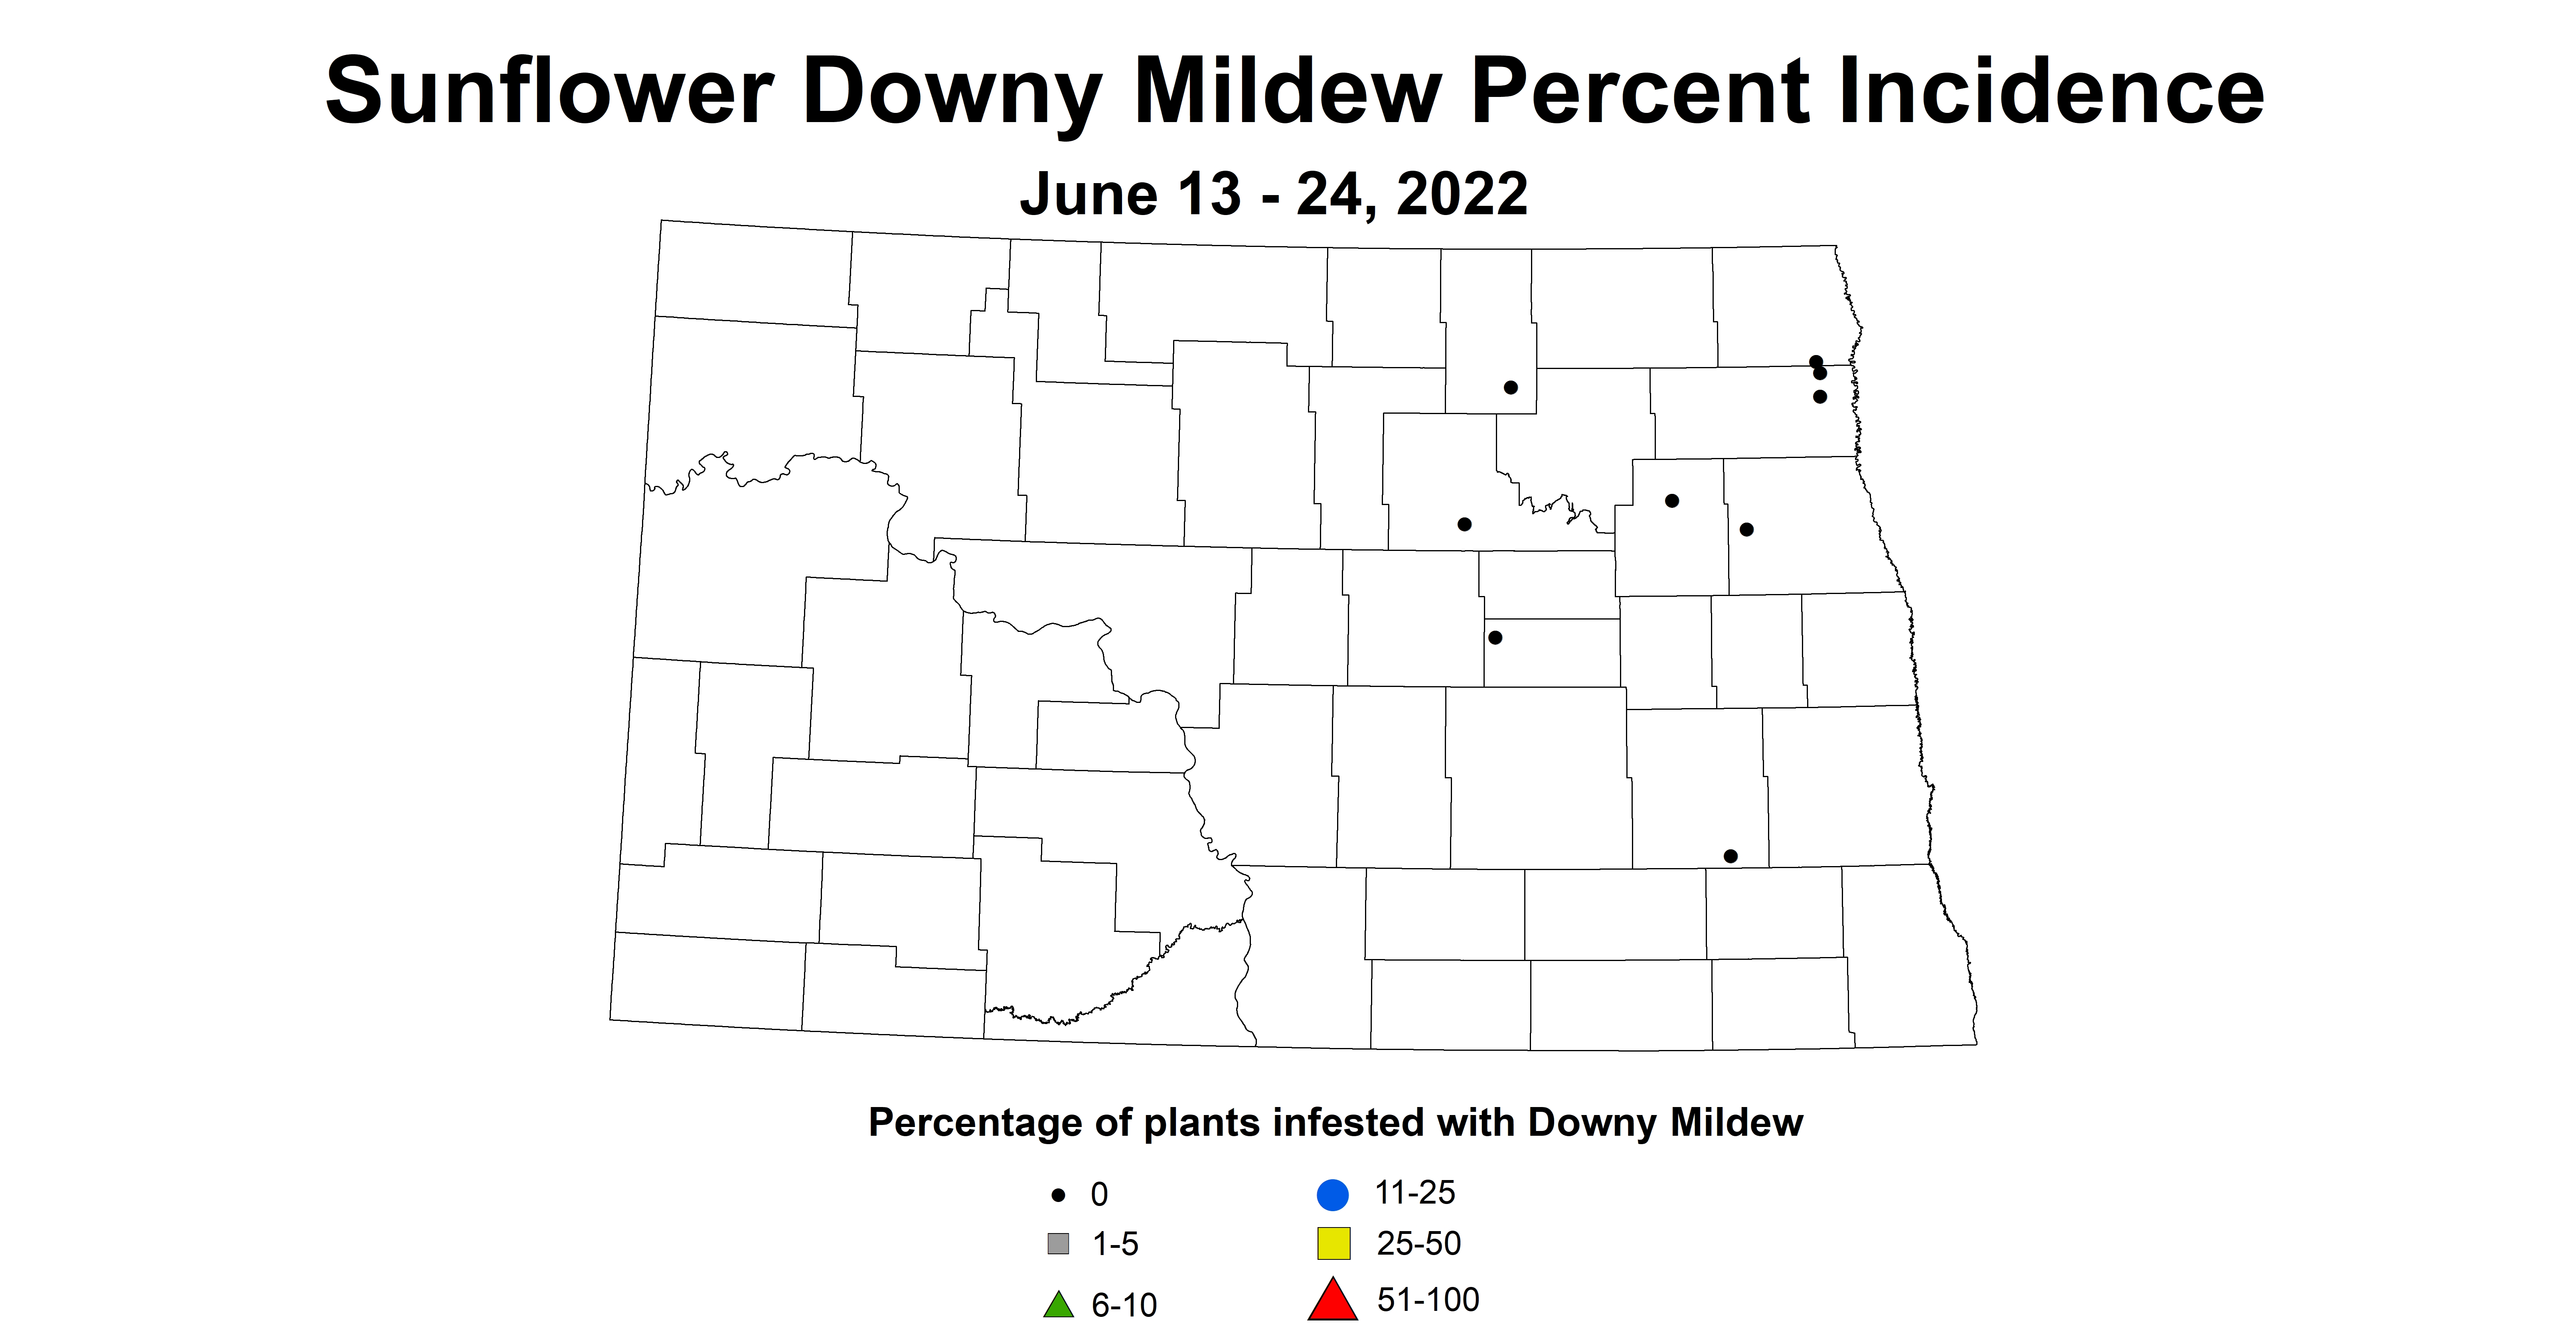 ND IPM map of sunflower downy mildew incidence June 13 - 24, 2022